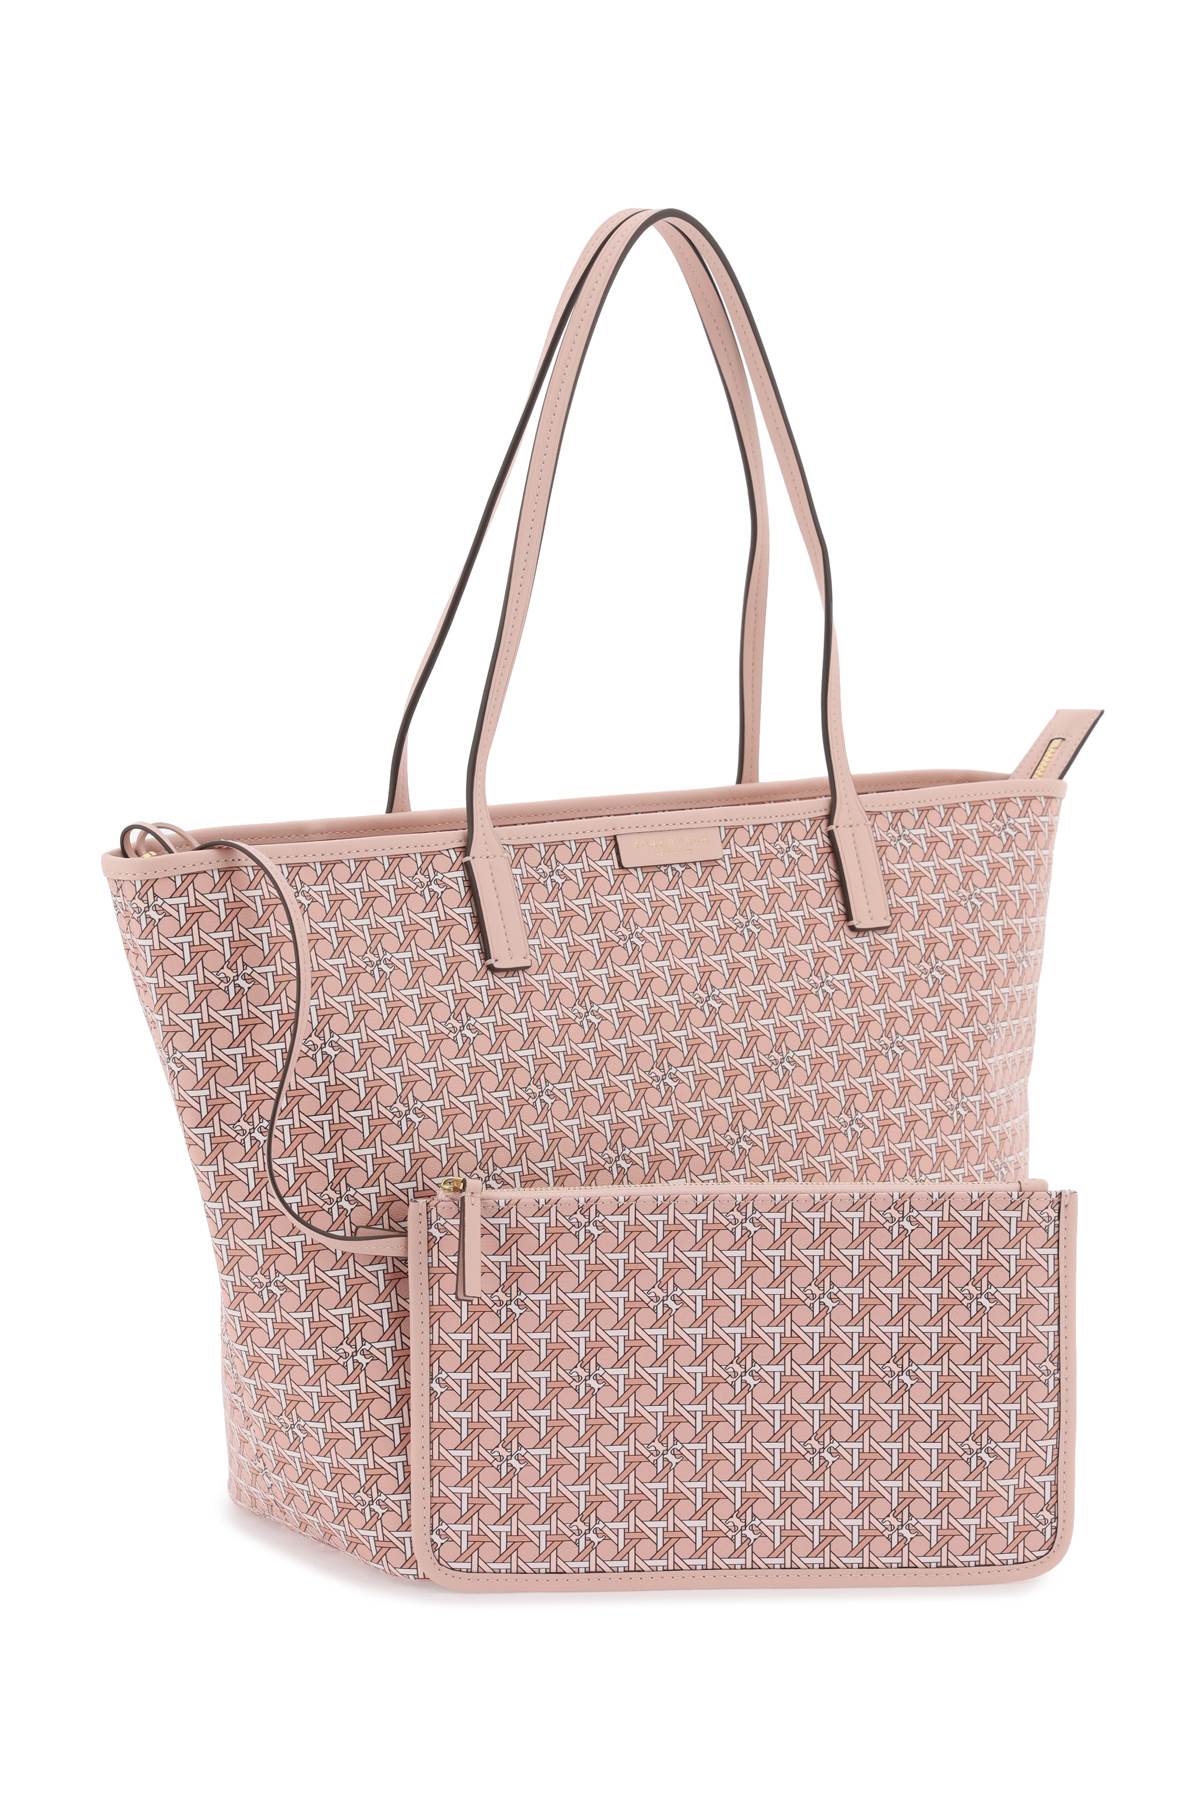 Shop Tory Burch Ever-ready Shopping Bag In Winter Peach (pink)